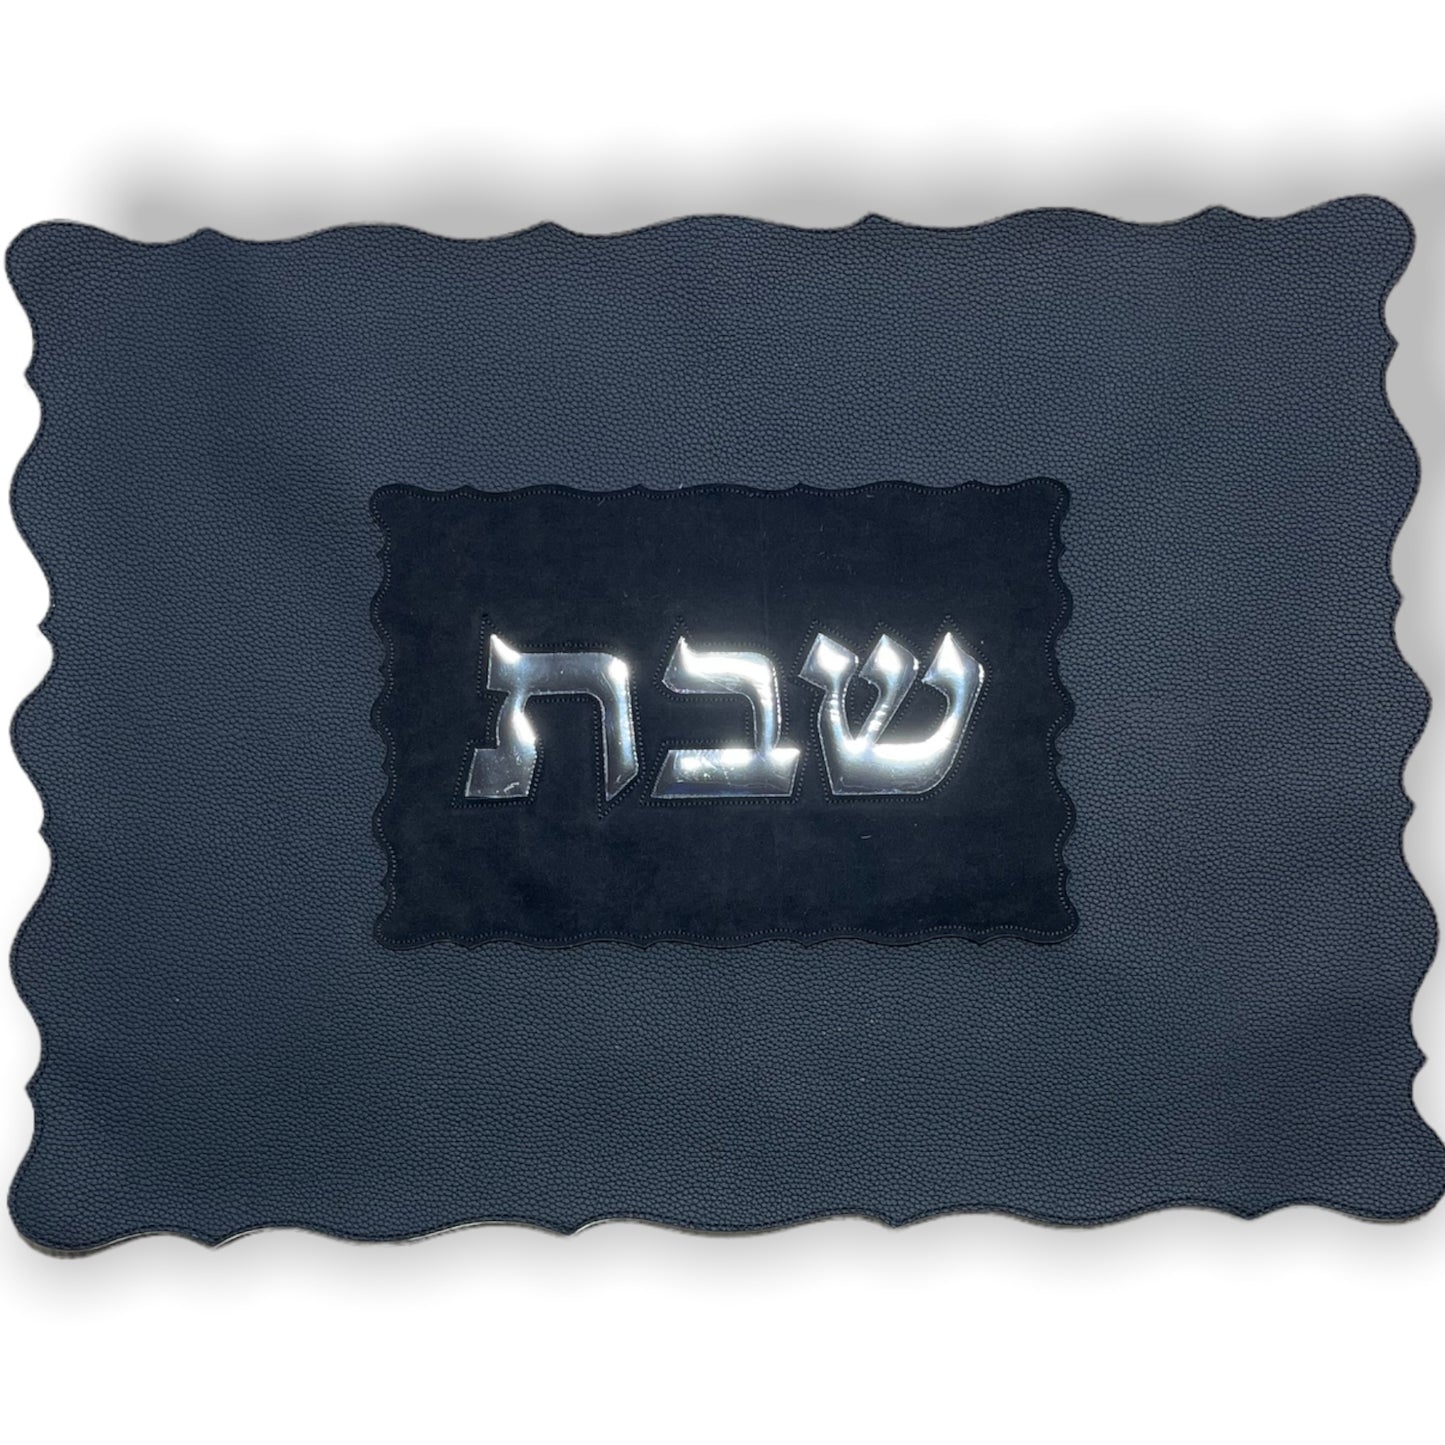 Gorgeous luxurious leather like Challah Cover -Black and Silver laser cut, wavy edges for shabbat 17 x 21"